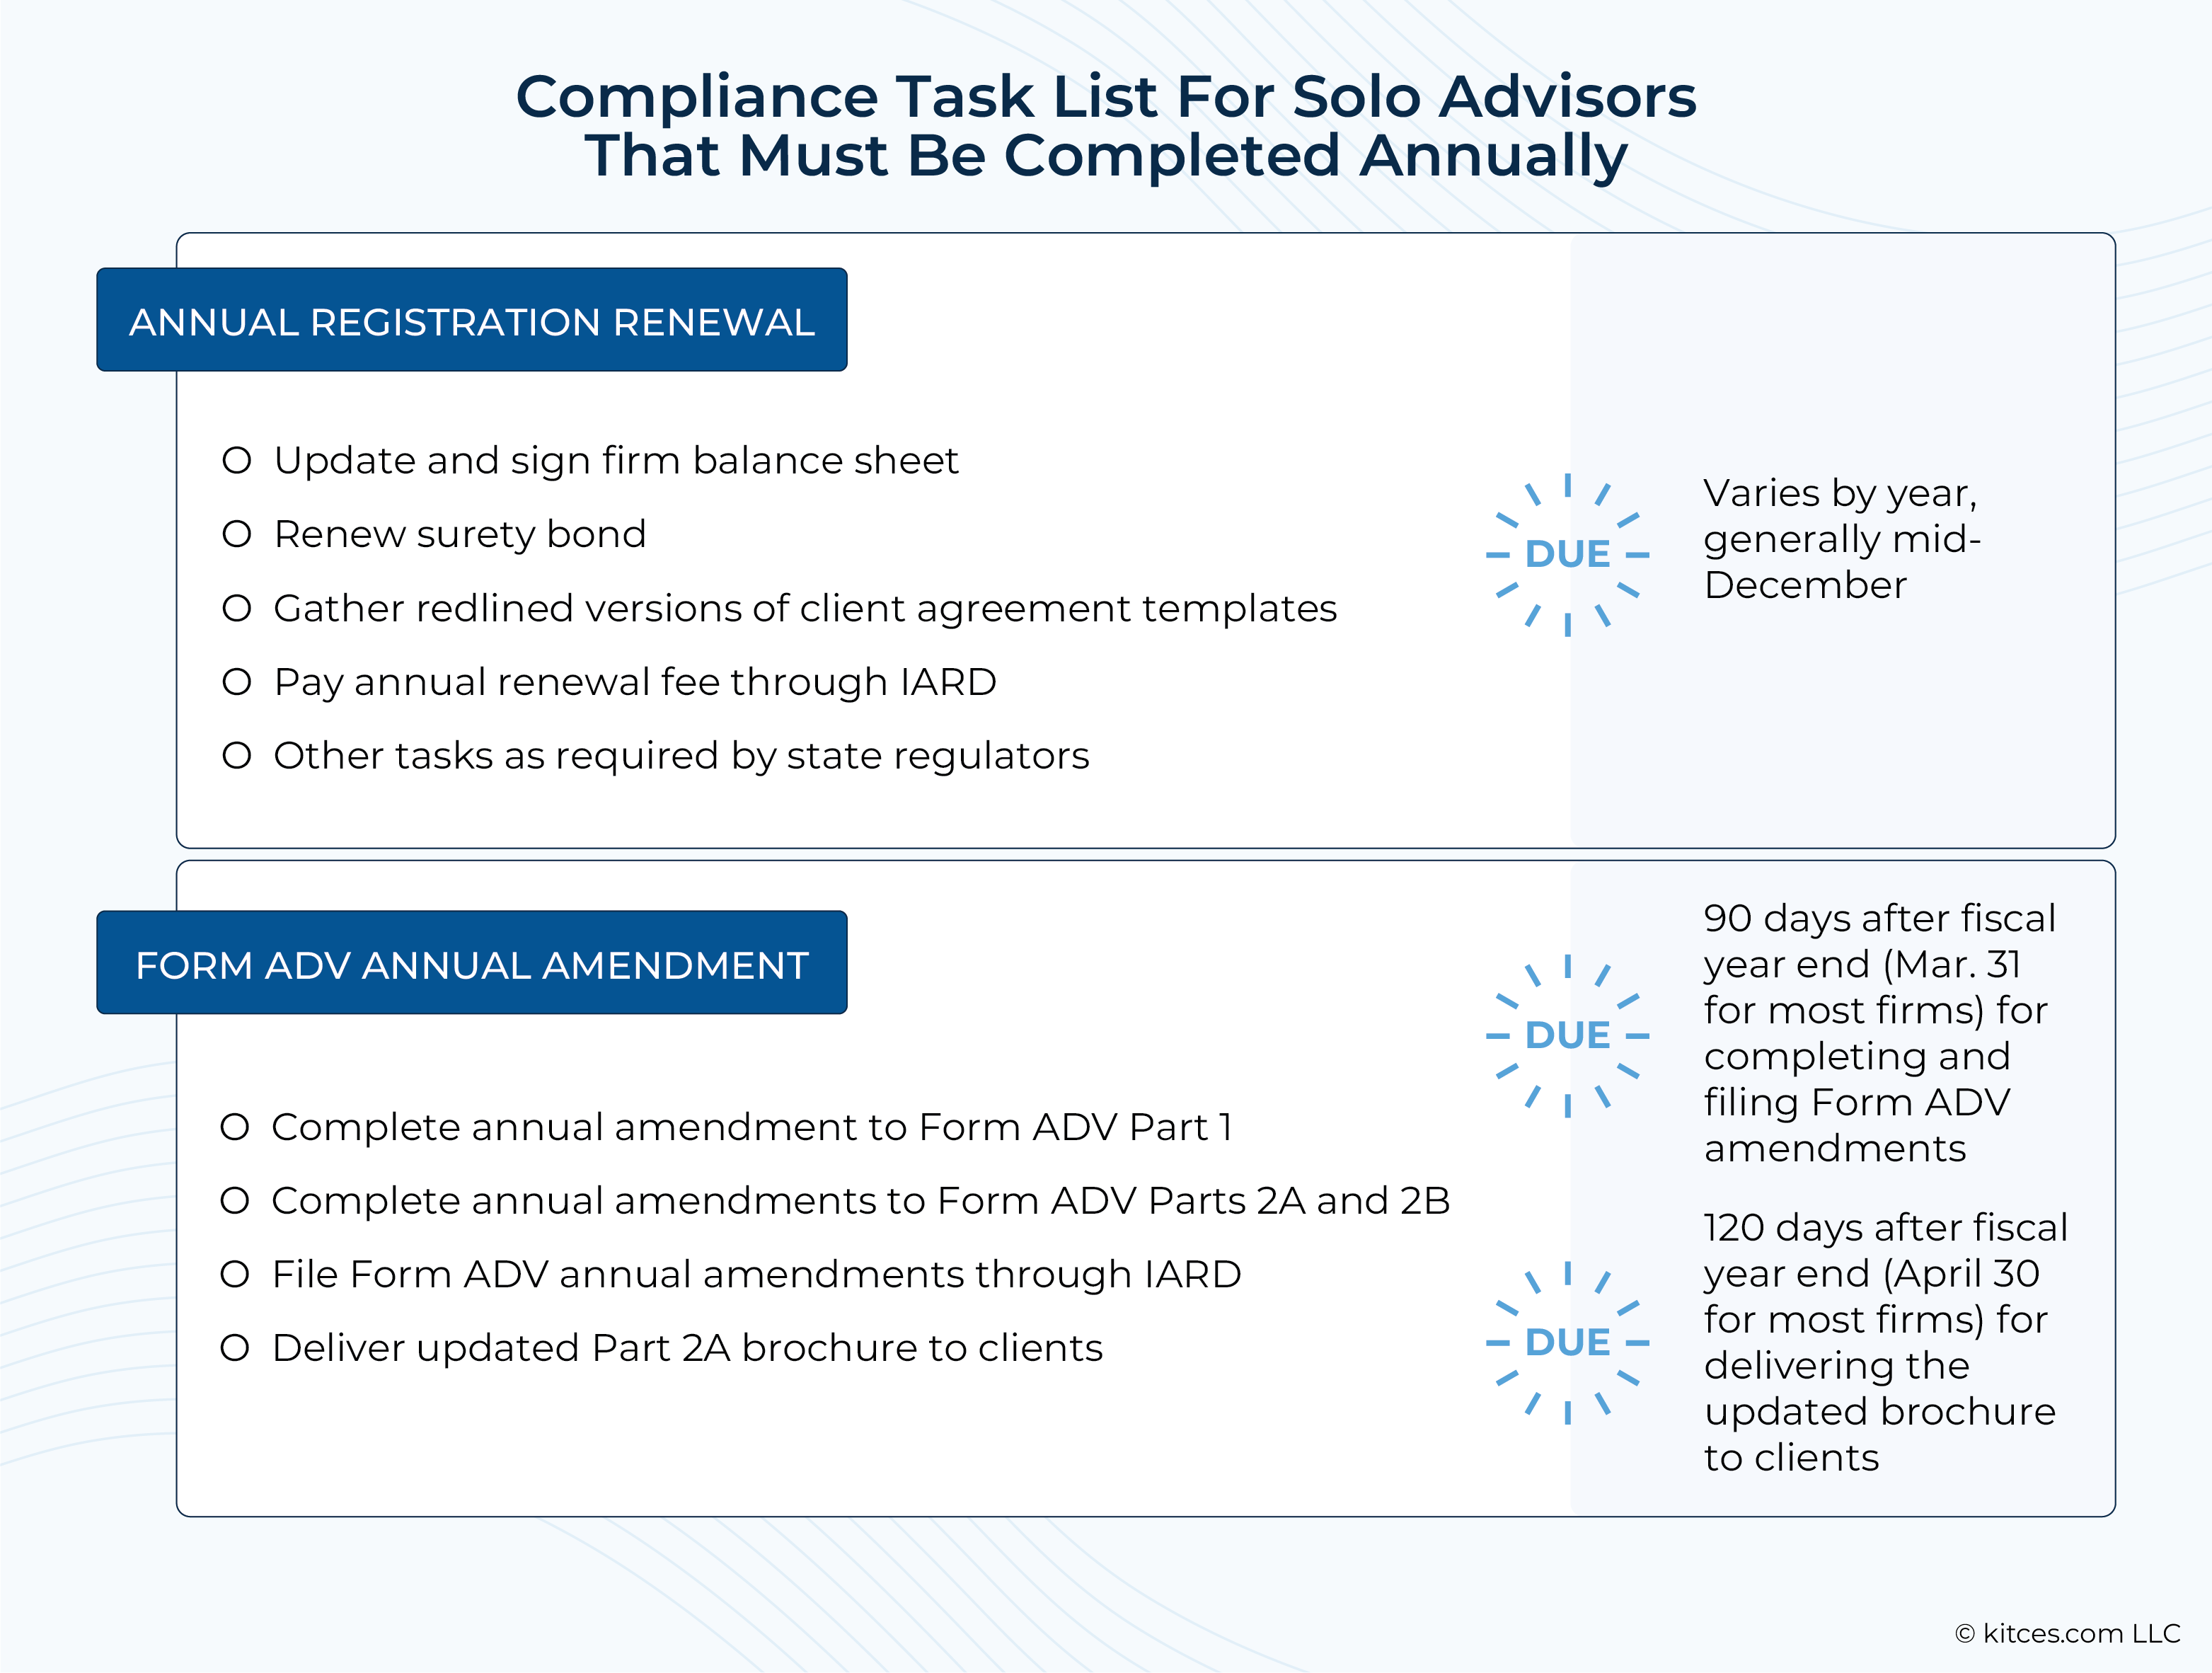 Compliance Task List For Solo Advisors That Must Be Completed Annually